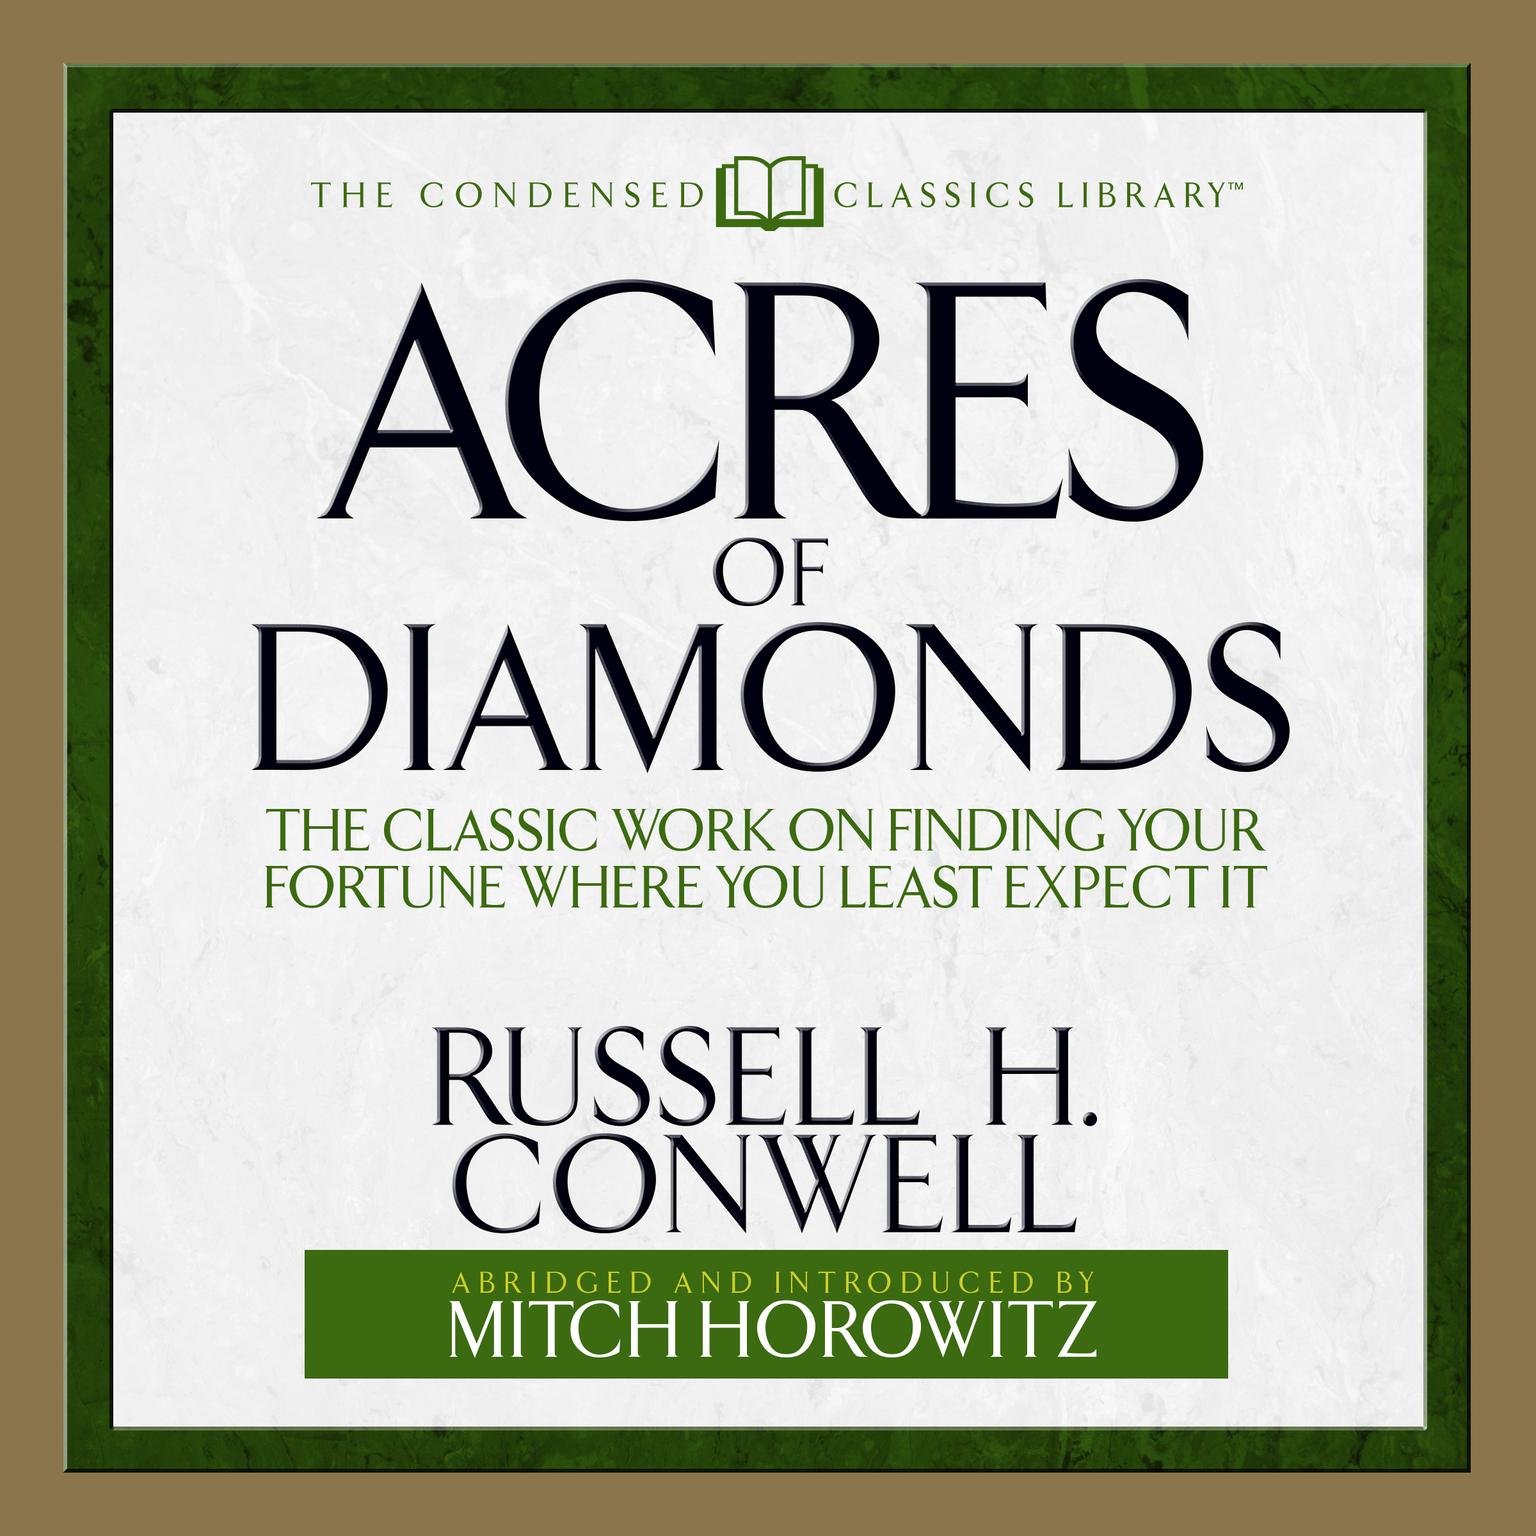 Acres of Diamonds (Abridged): The Classic Work on Finding Your Fortune Where You Least Expect It Audiobook, by Russell H. Conwell